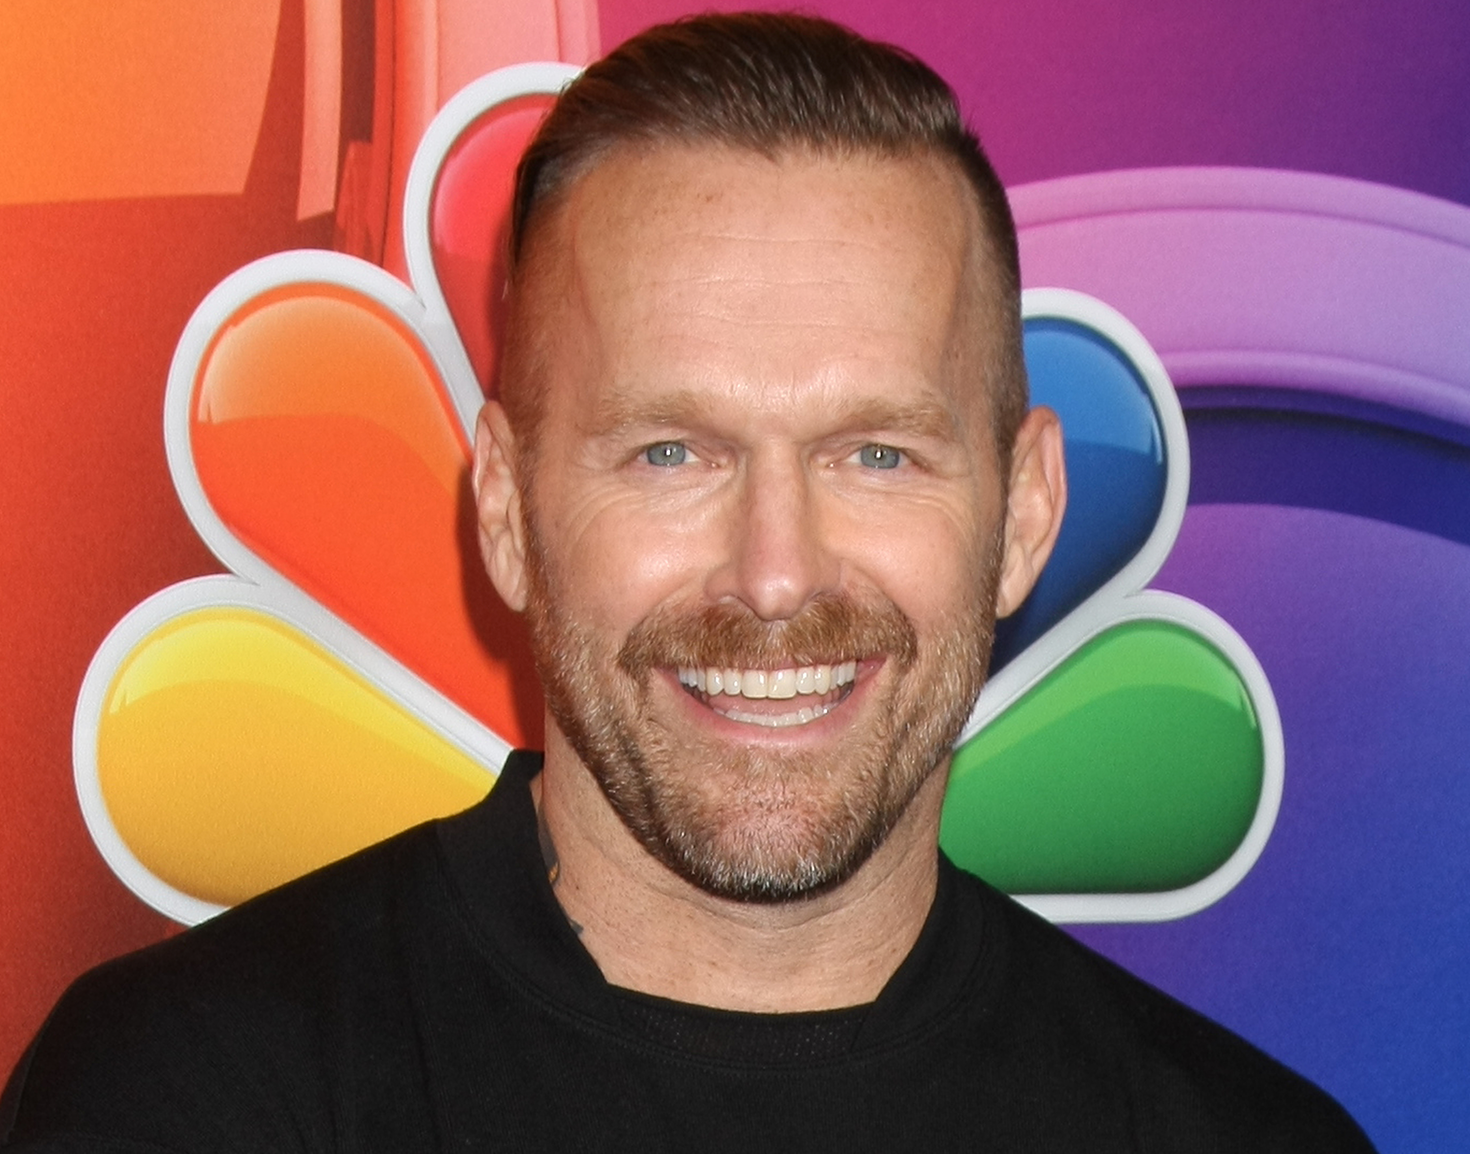 Biggest Loser Trainer Bob Harper Reveals Hes Recovering From A Heart Attack With A New Diet 